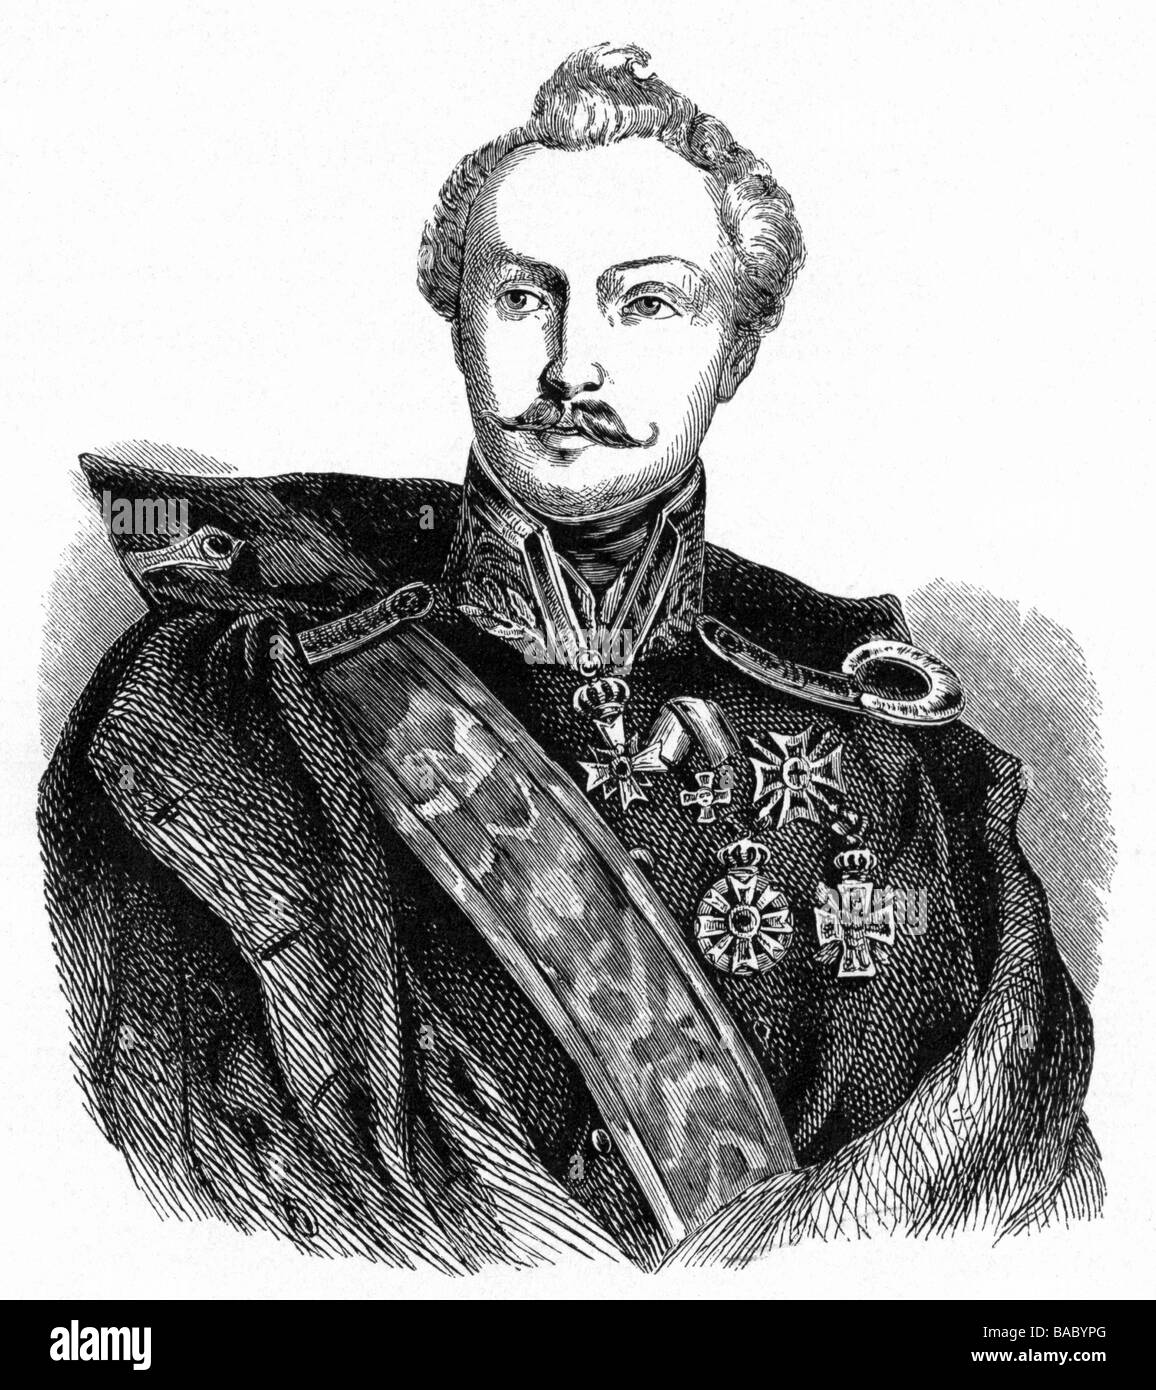 Thurn und Taxis, Karl Theodor Prince of, 17.7.1797 - 21.6.1868, Bavarian general, portrait, wood engraving, 19th century, , Stock Photo